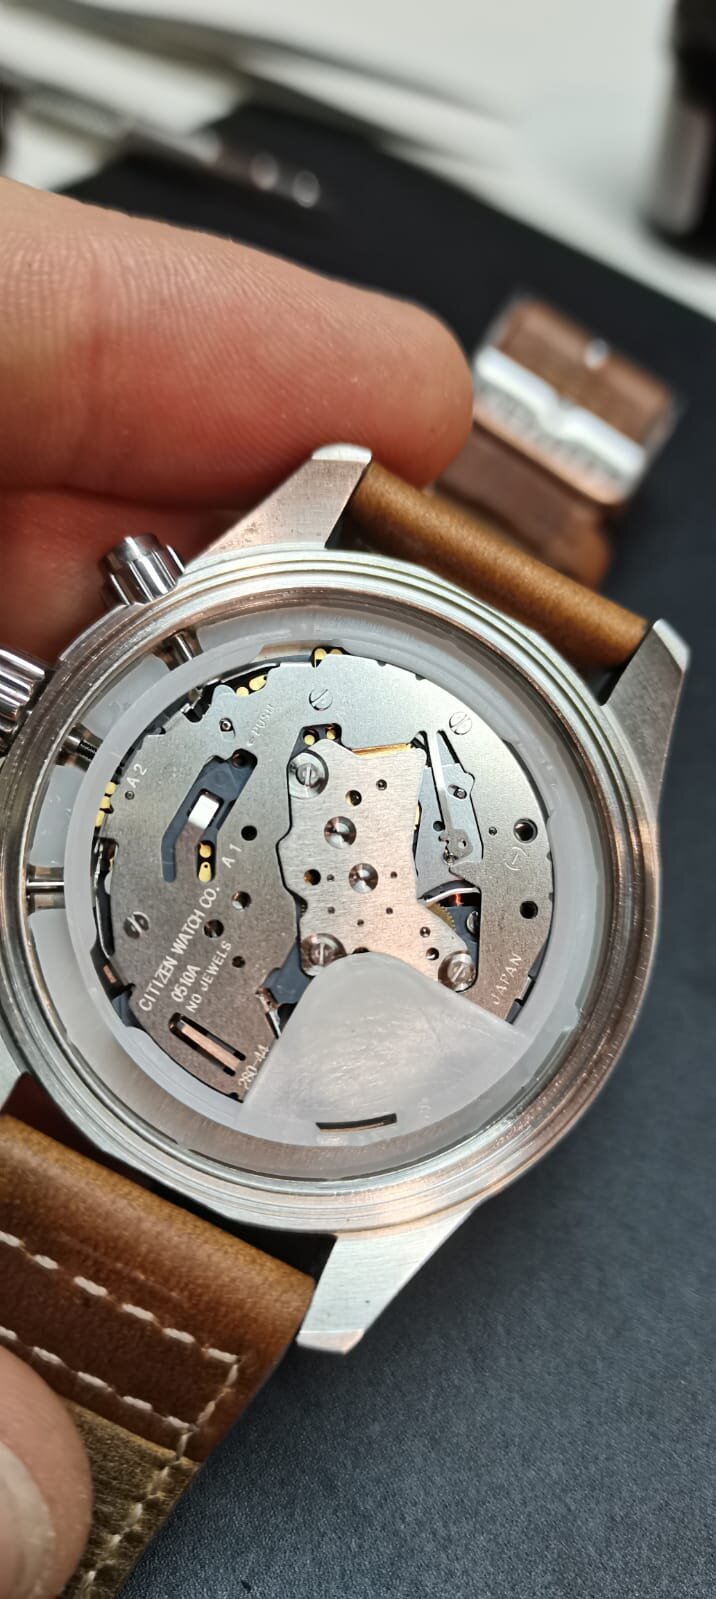 Citizen 0510 - S111099 741221604 GN - 4 - S watch repair in for battery and  reseal Queensgate shopping centre Peterborough. PE15. We are open Sundays.  | Watches Fixed | Watch Repairs | Latest Watch News | Watch Hub